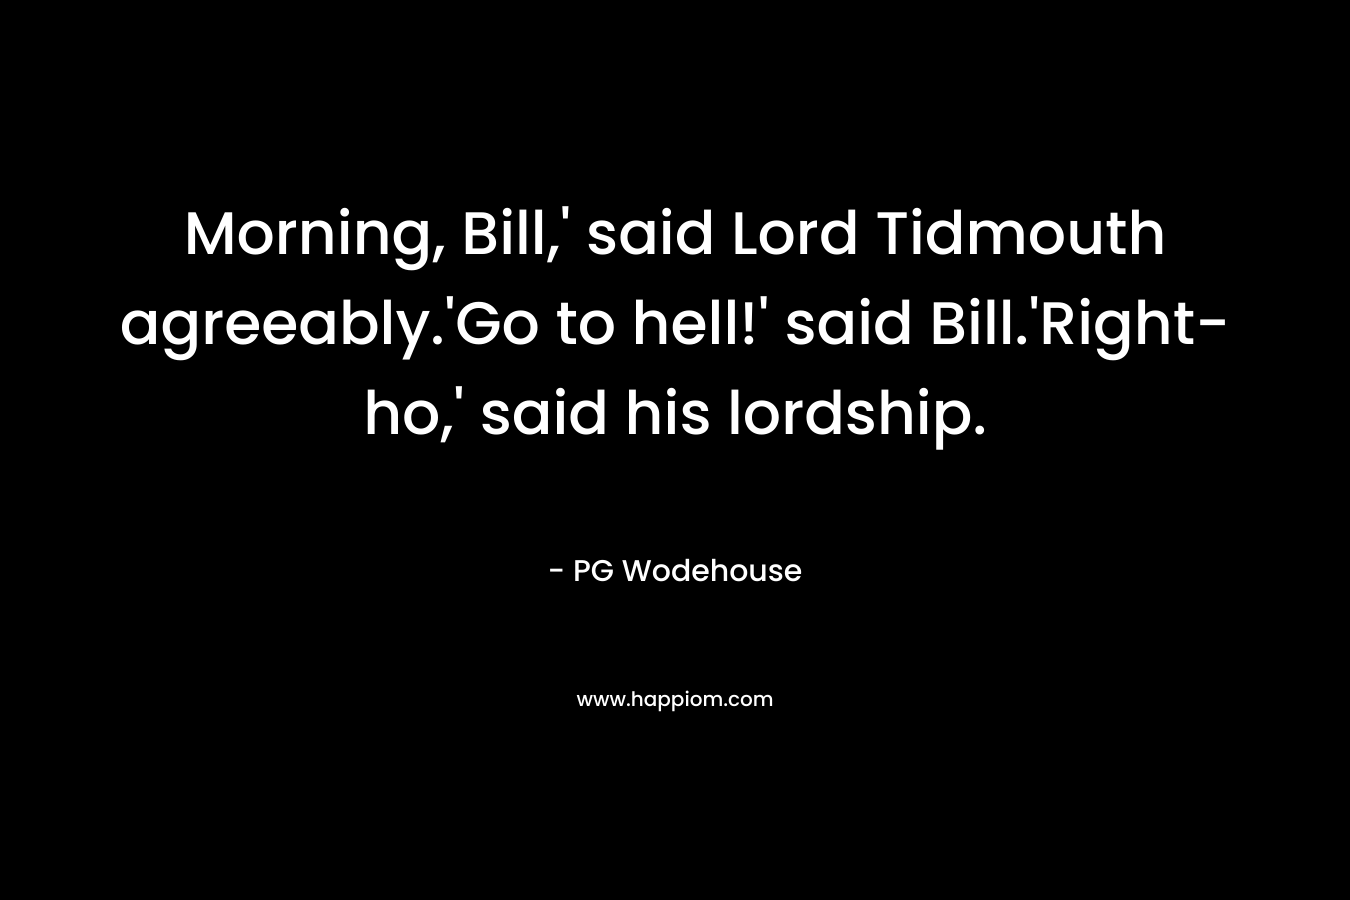 Morning, Bill,’ said Lord Tidmouth agreeably.’Go to hell!’ said Bill.’Right-ho,’ said his lordship. – PG Wodehouse